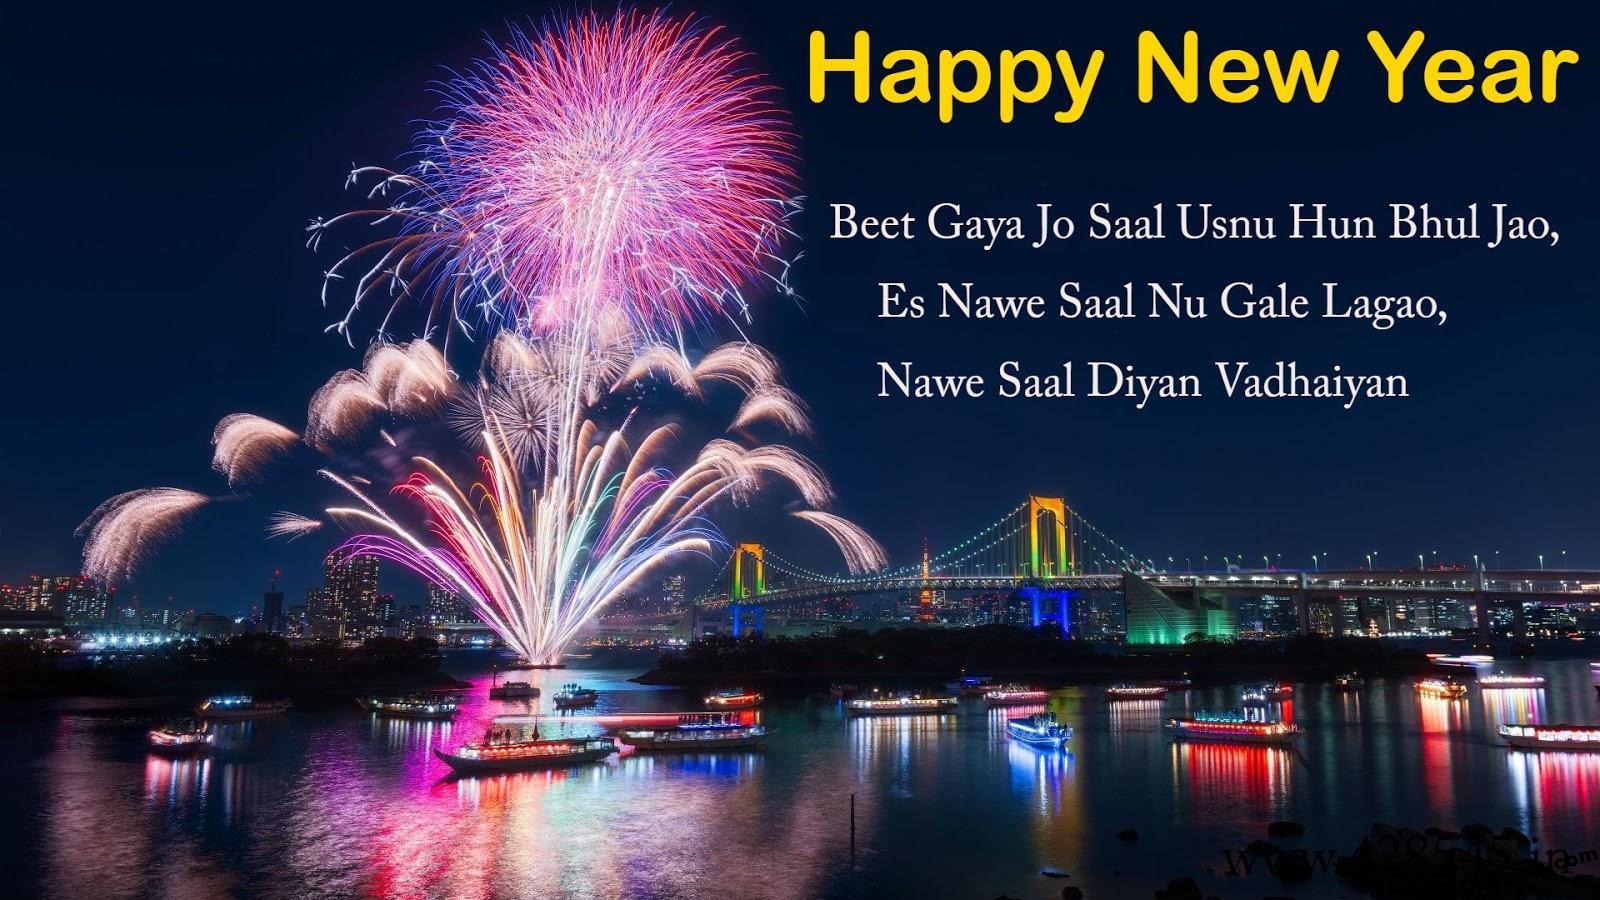 Happy New Year Wishes Image - Download Happy New Year